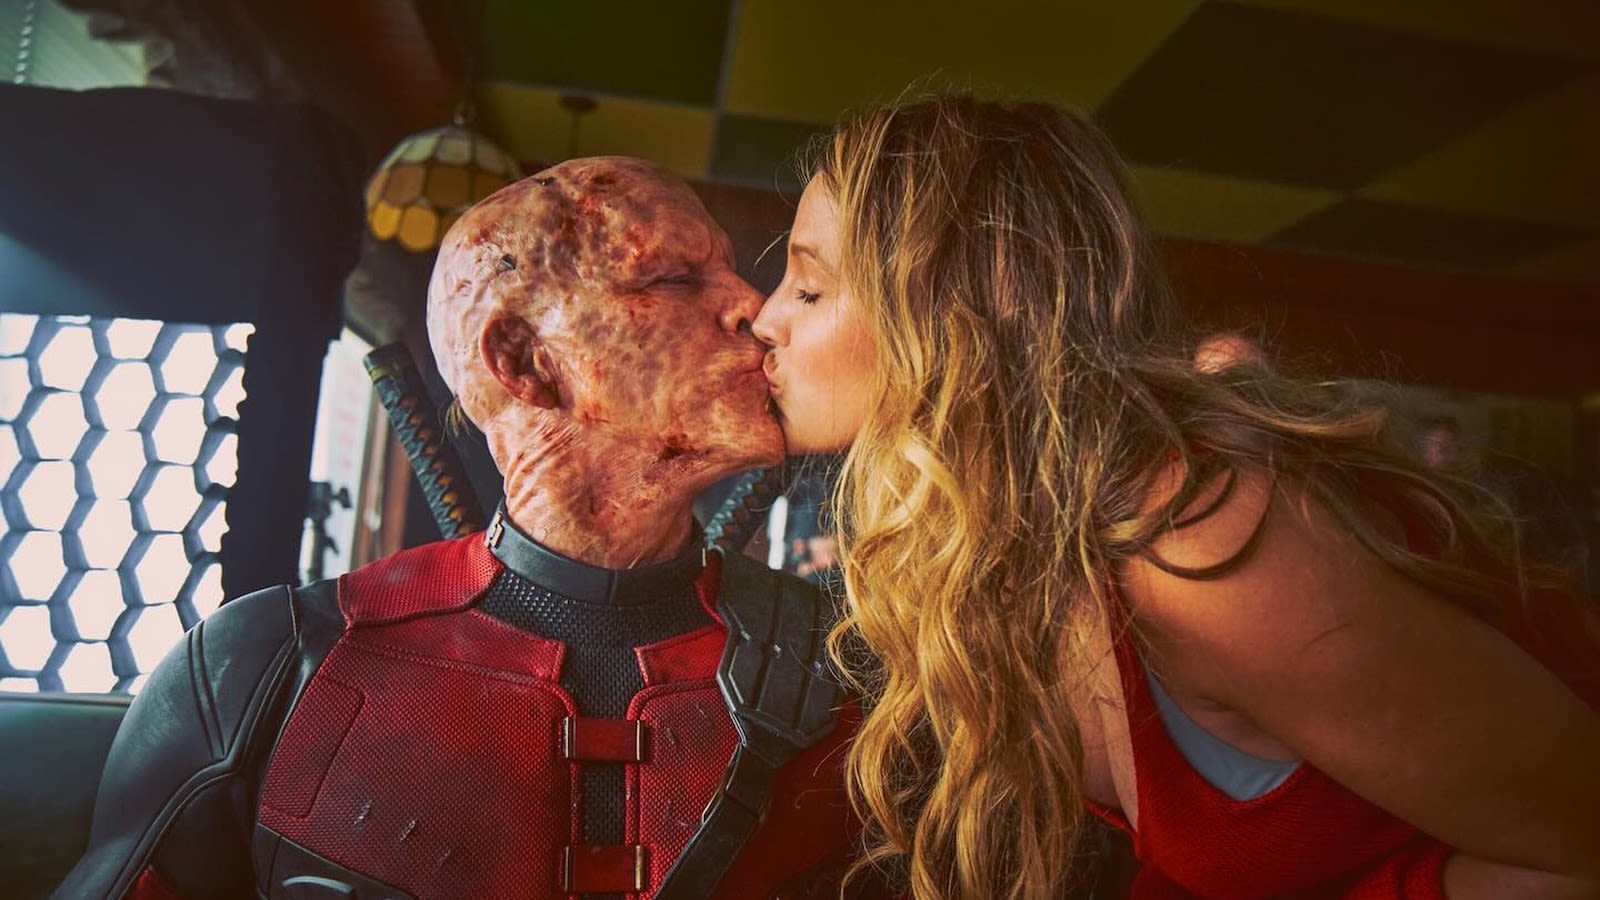 Blake Lively supports Ryan Reynolds' new movie 'Deadpool & Wolverine' with sweet post